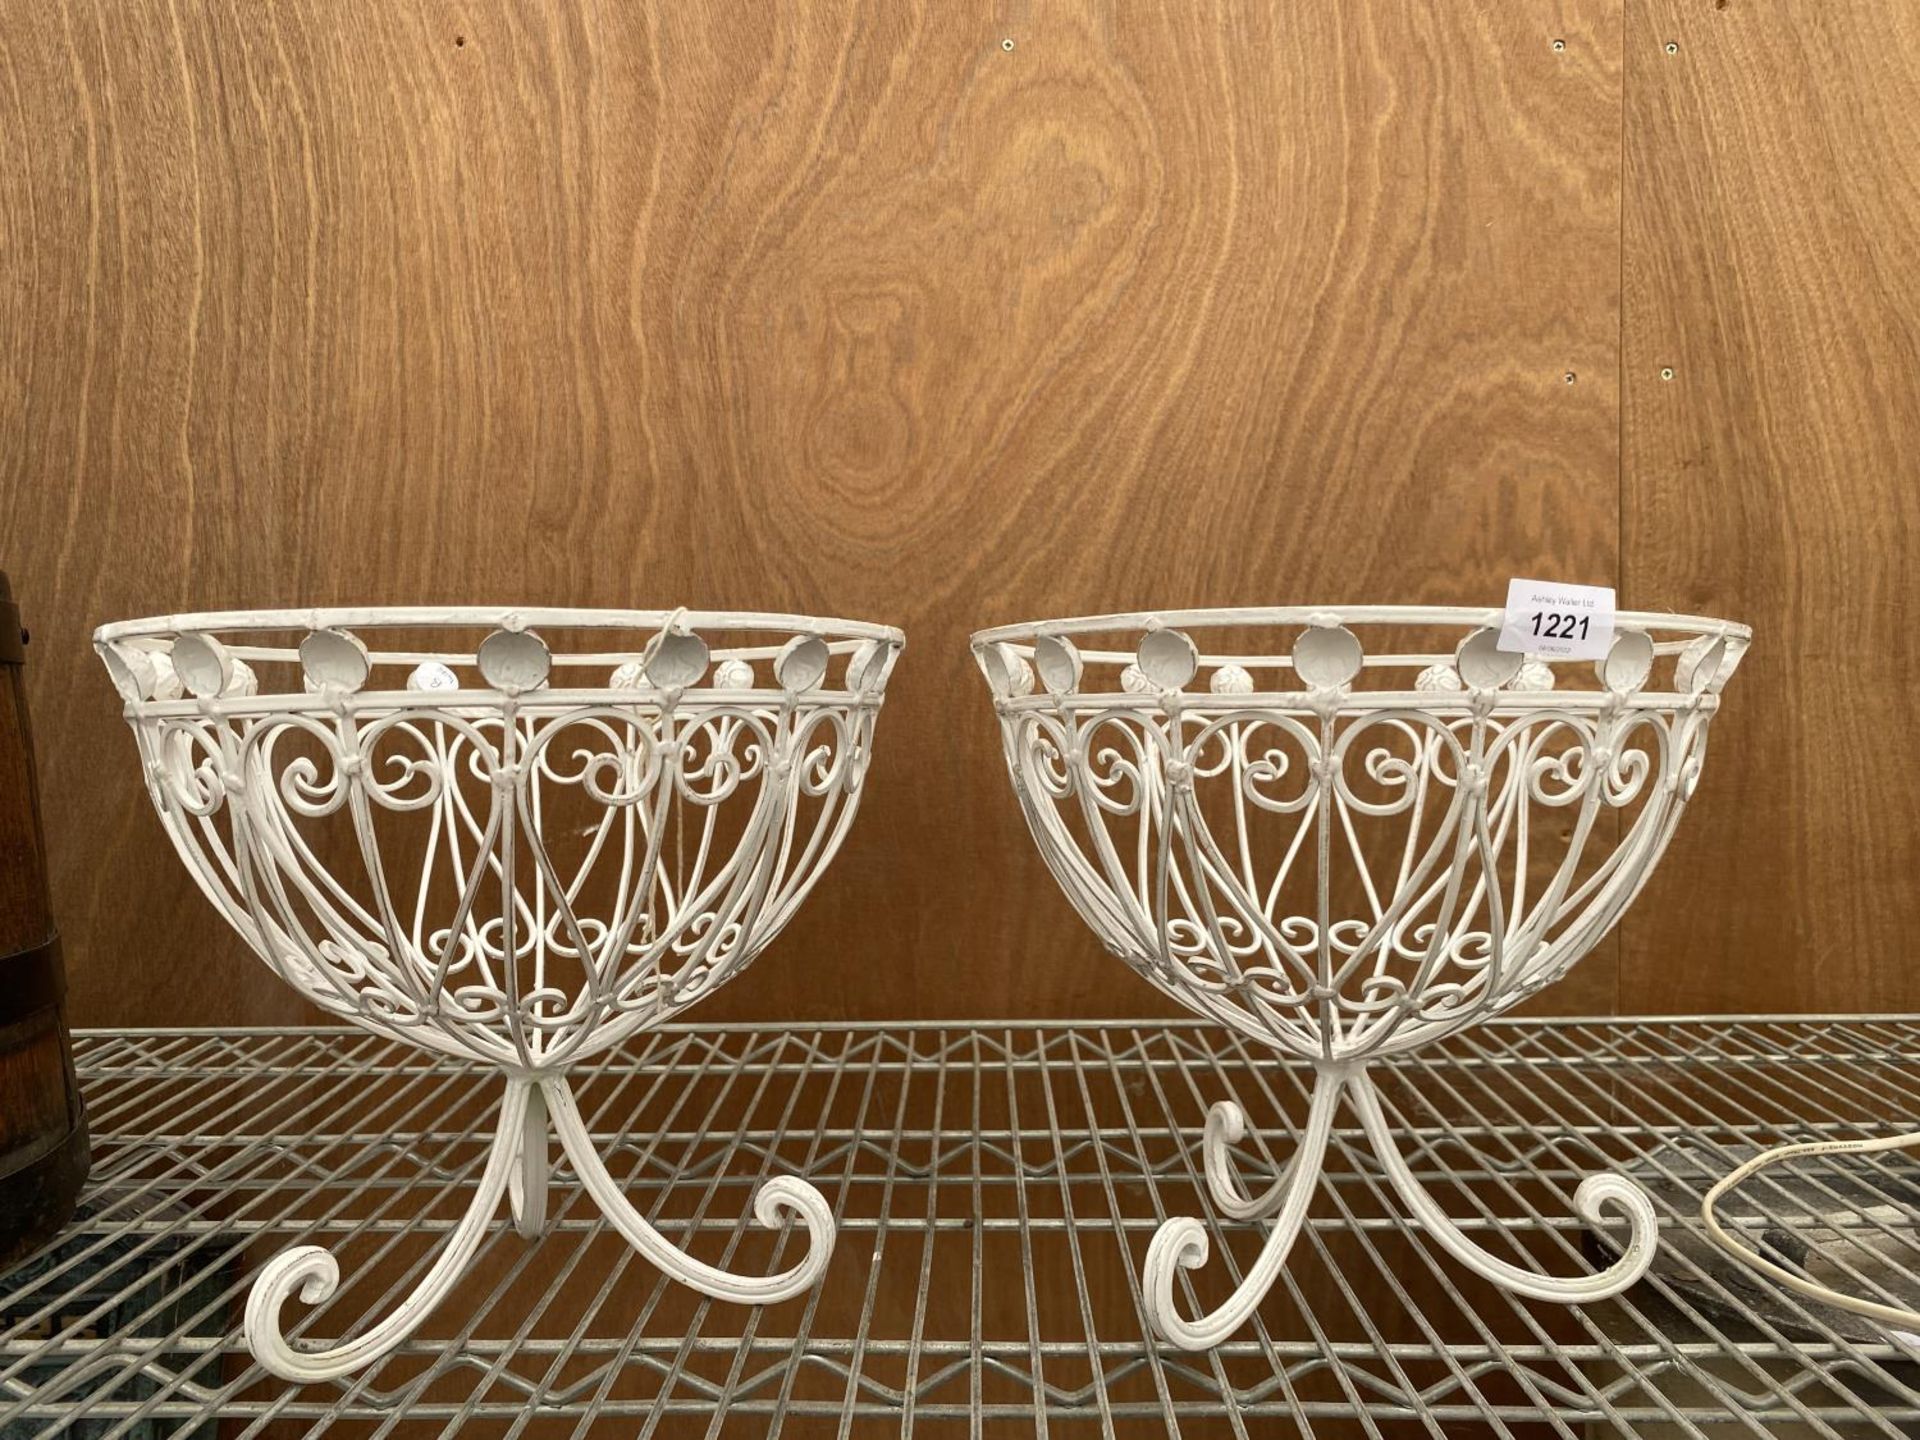 A PAIR OF DECORATIVE METAL PLANTERS